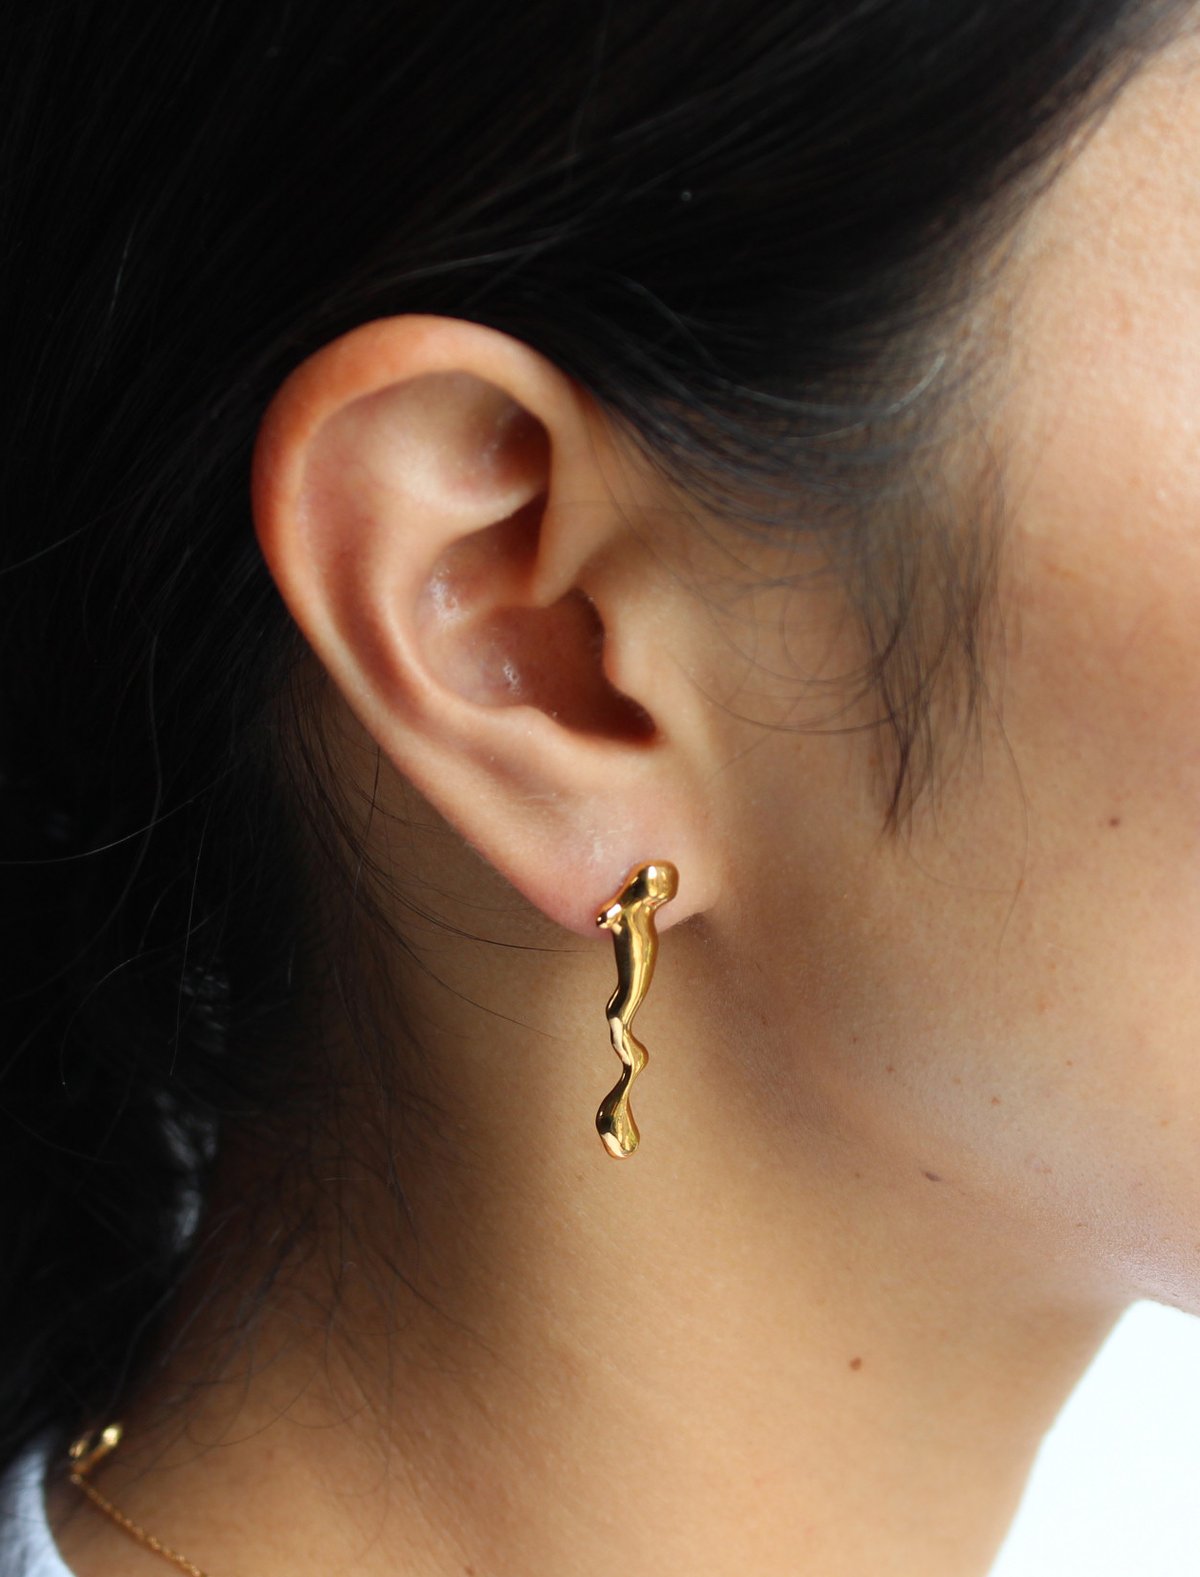 Image of drizzle earrings